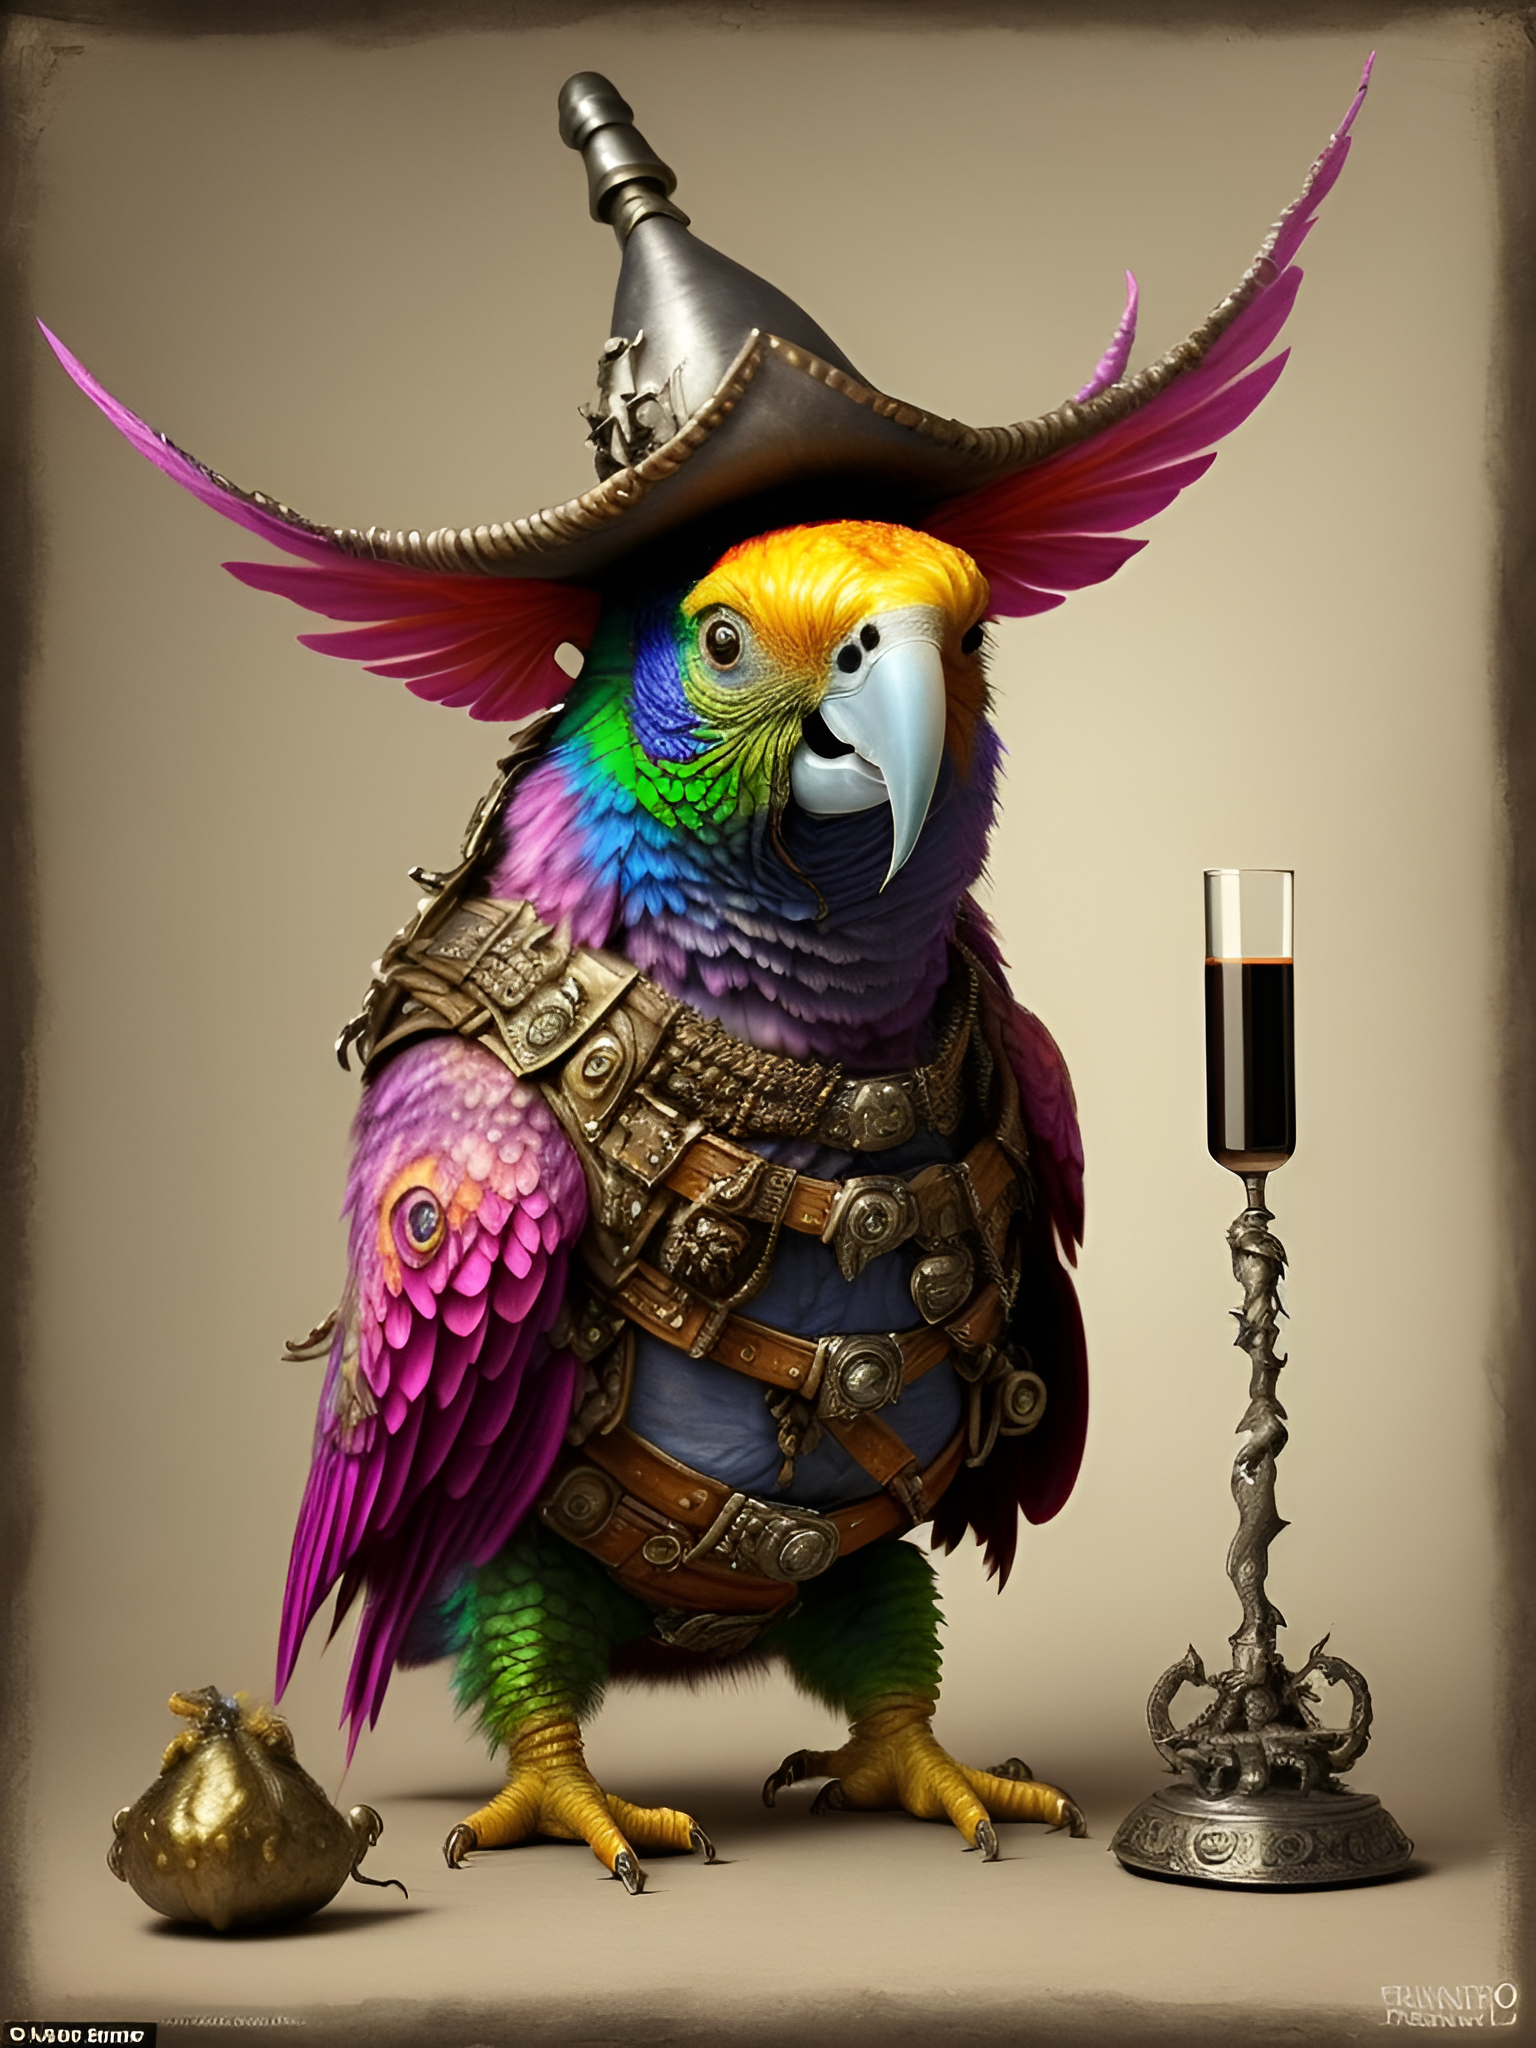 General 1536x2048 AI art parrot pirate hat drink humanoid animals birds portrait display simple background